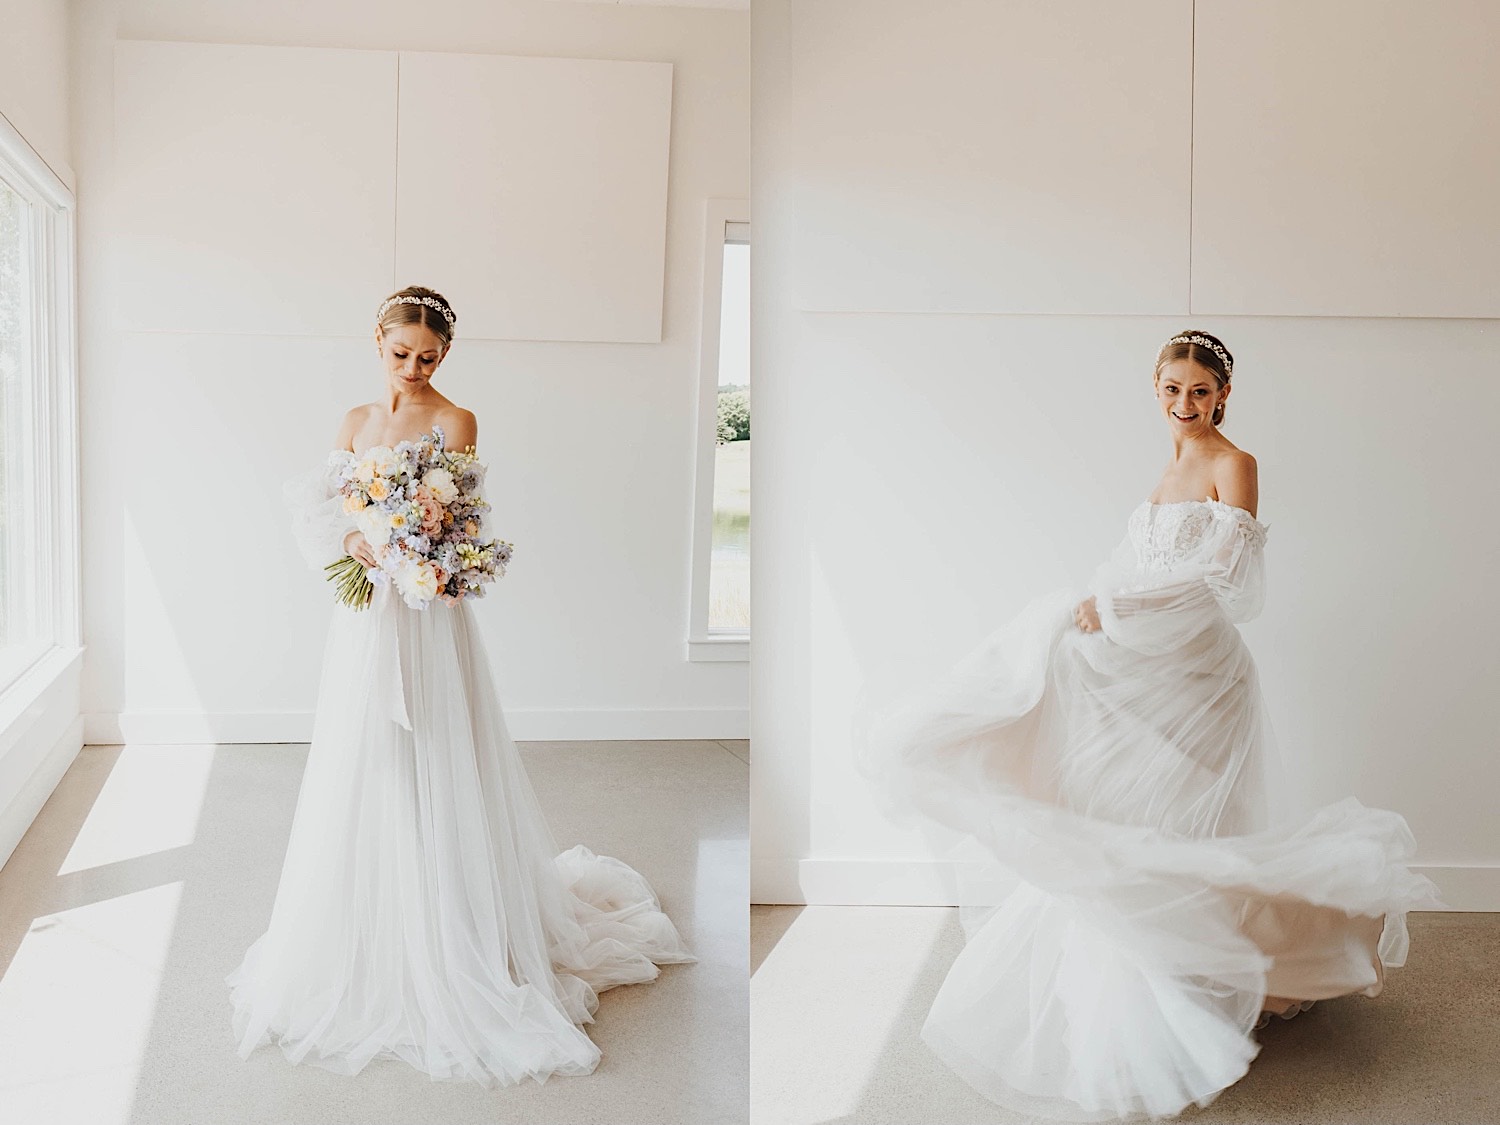 2 photos side by side, the left is of a bride holding her bouquet and looking down at it, the right is of the bride spinning in her dress and smiling at the camera